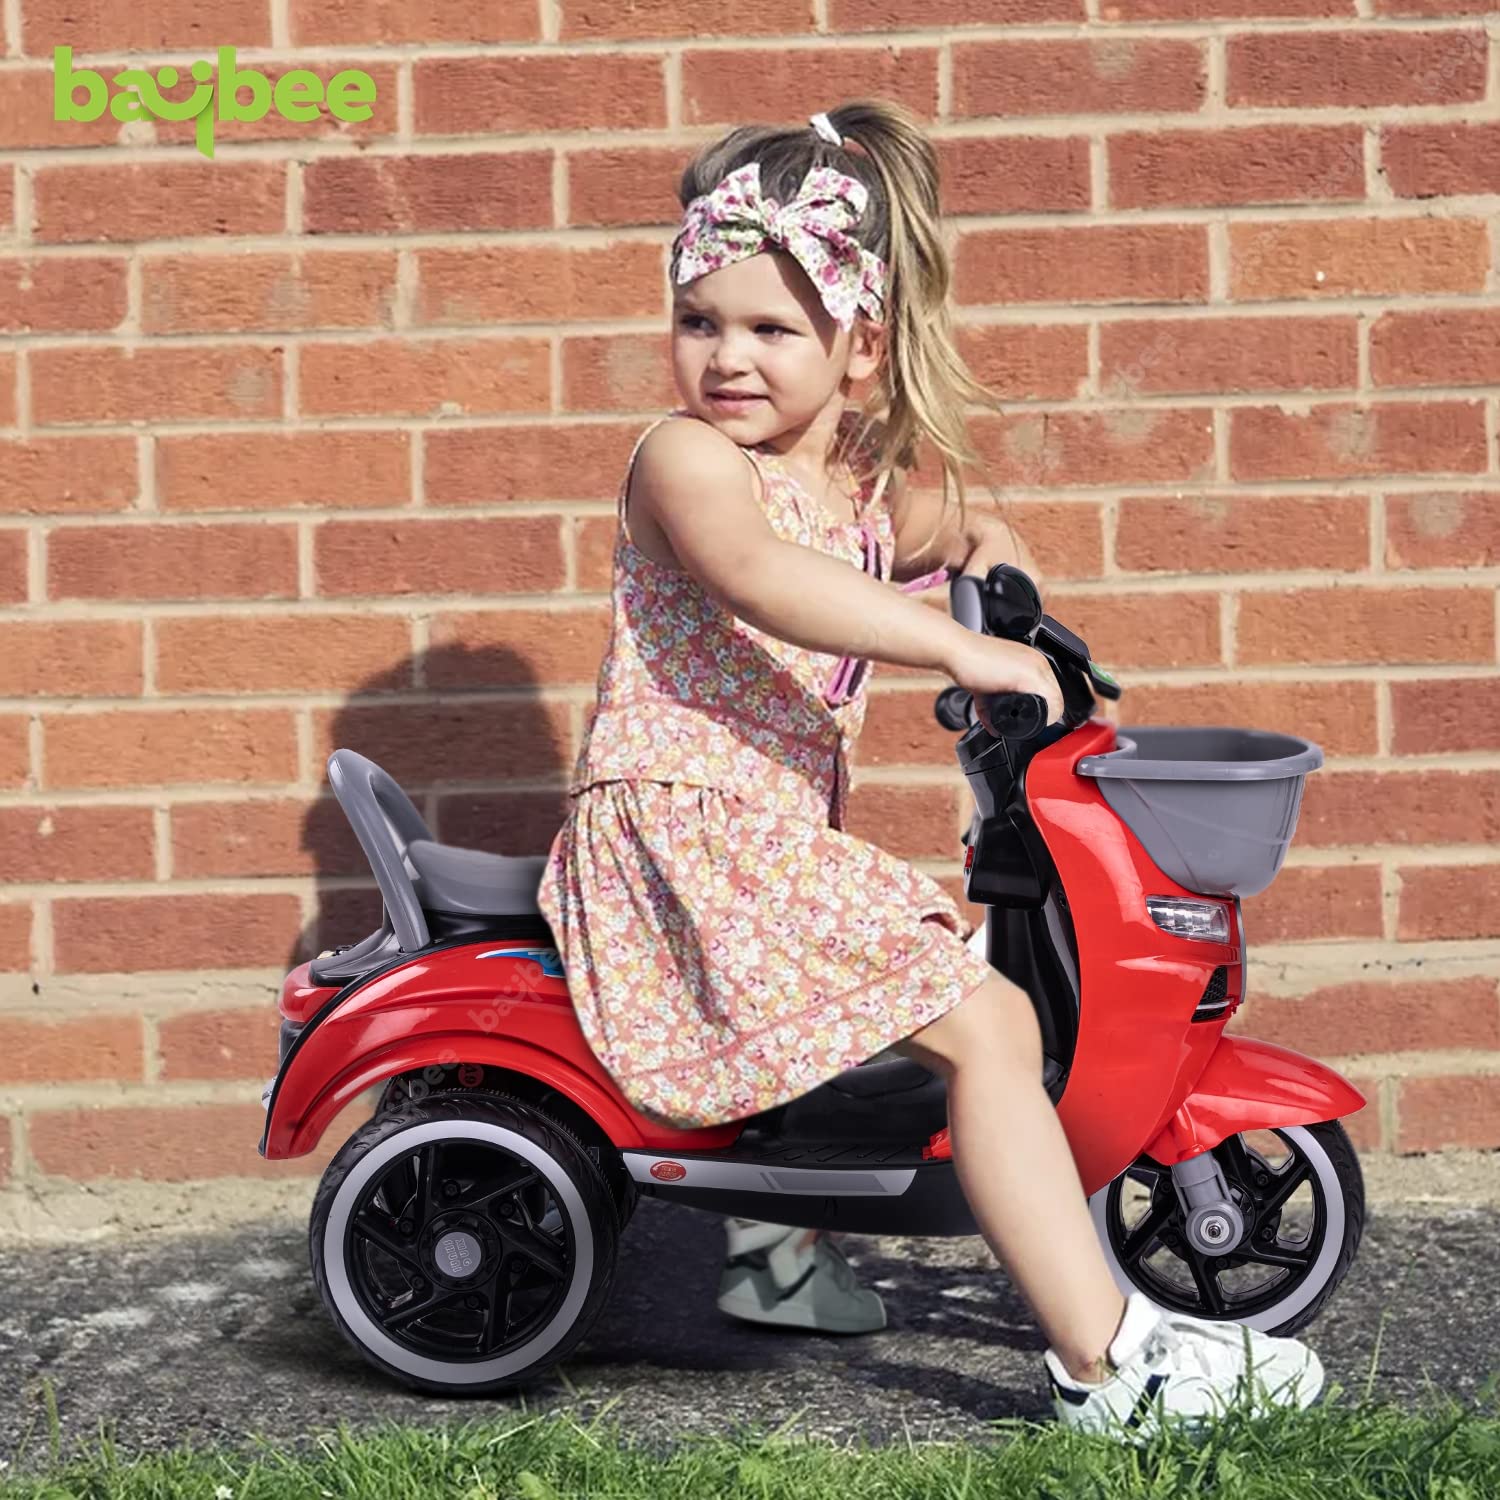 Minikin Pepto Kids Rechargeable Battery Operated Bike | Ride on Toy Baby Bike with Light & Music 1-5 Years